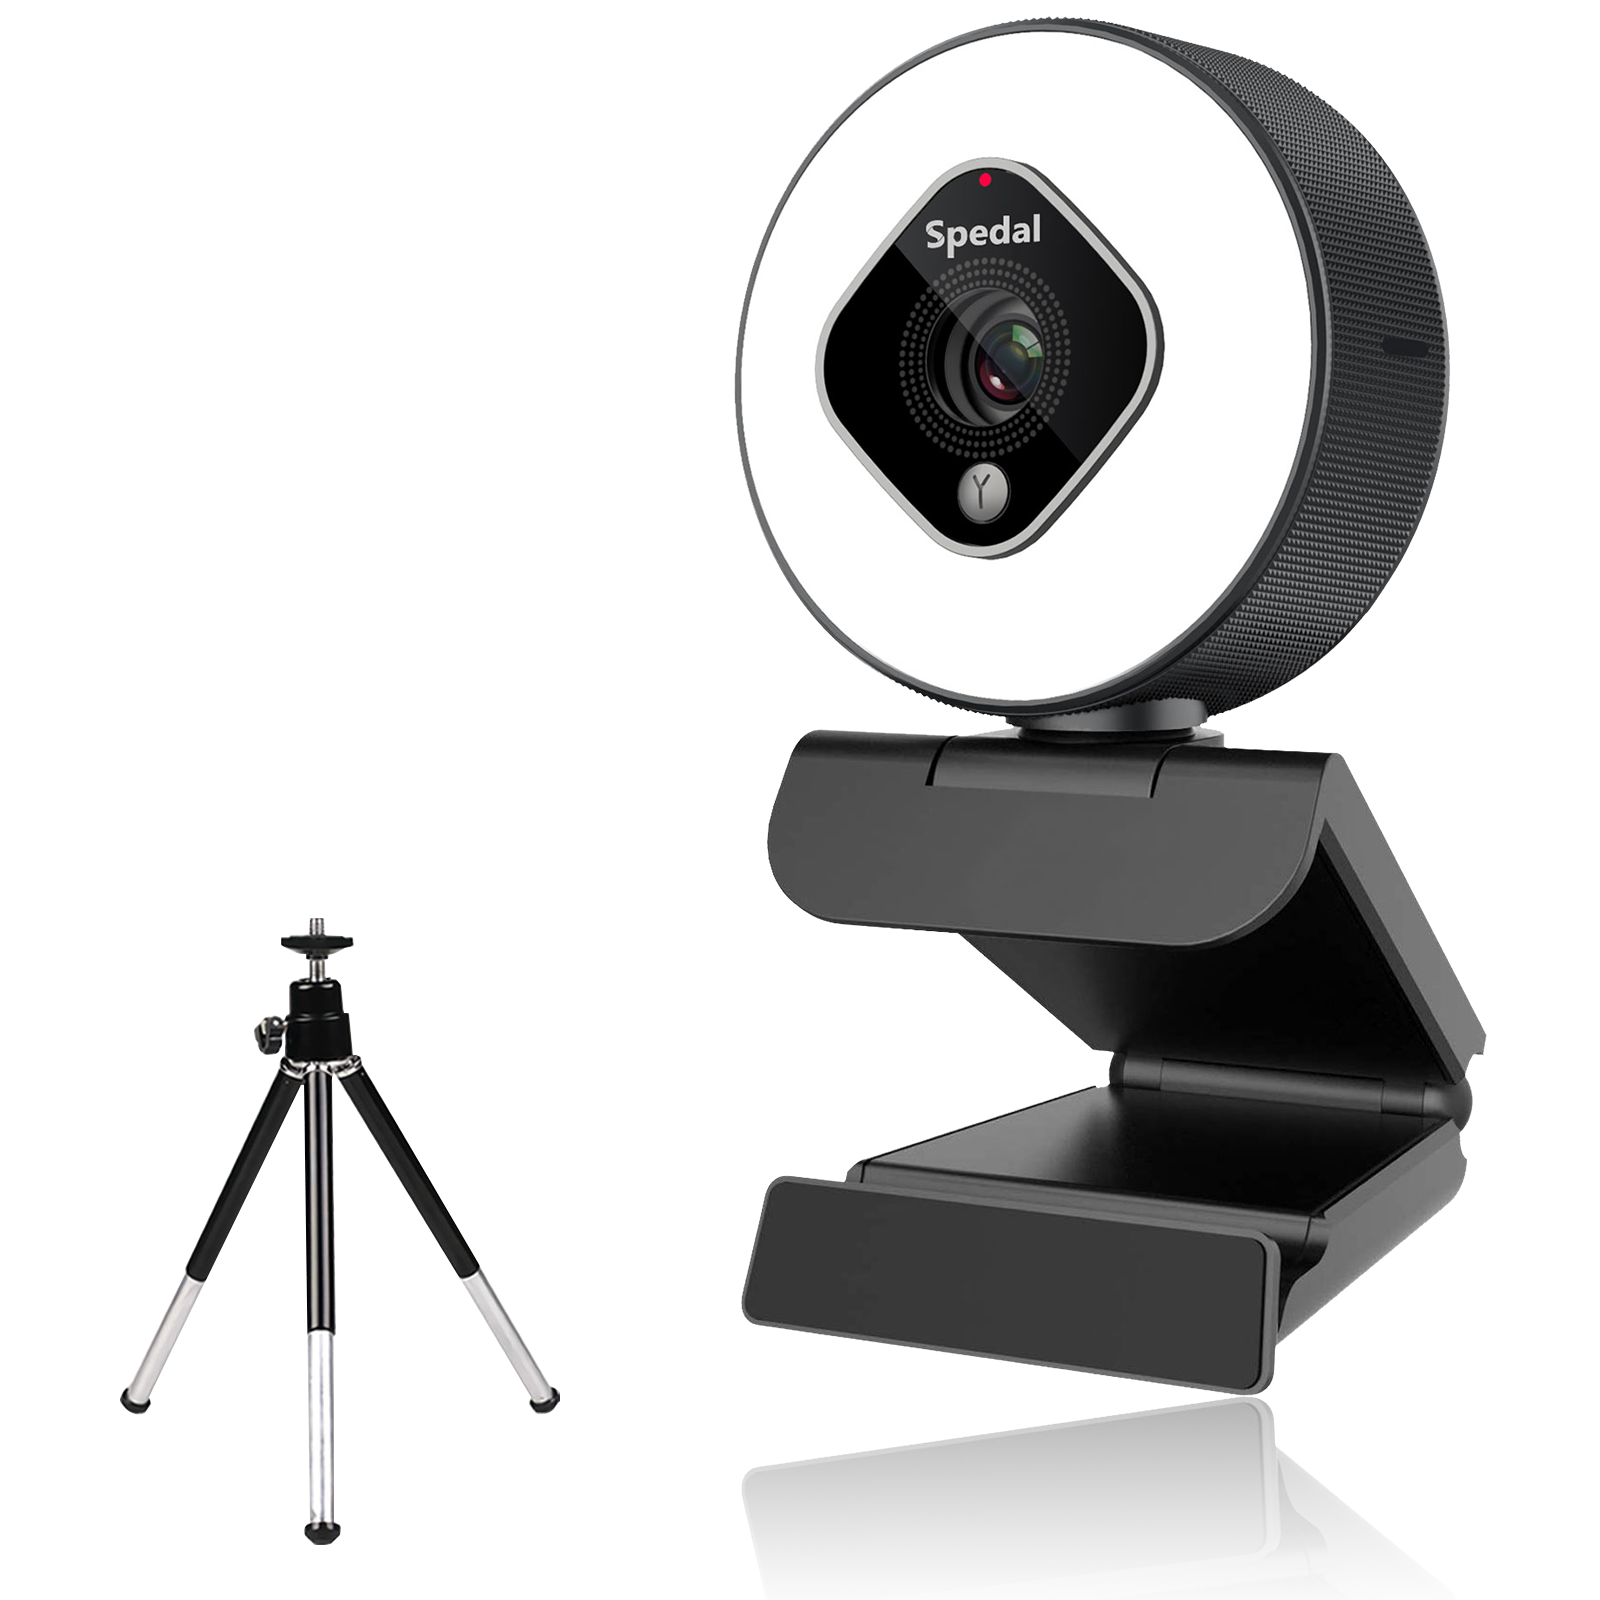 FF931-4K Webcam 120 Degree Wide Viewing with MIC – Spedal-Store